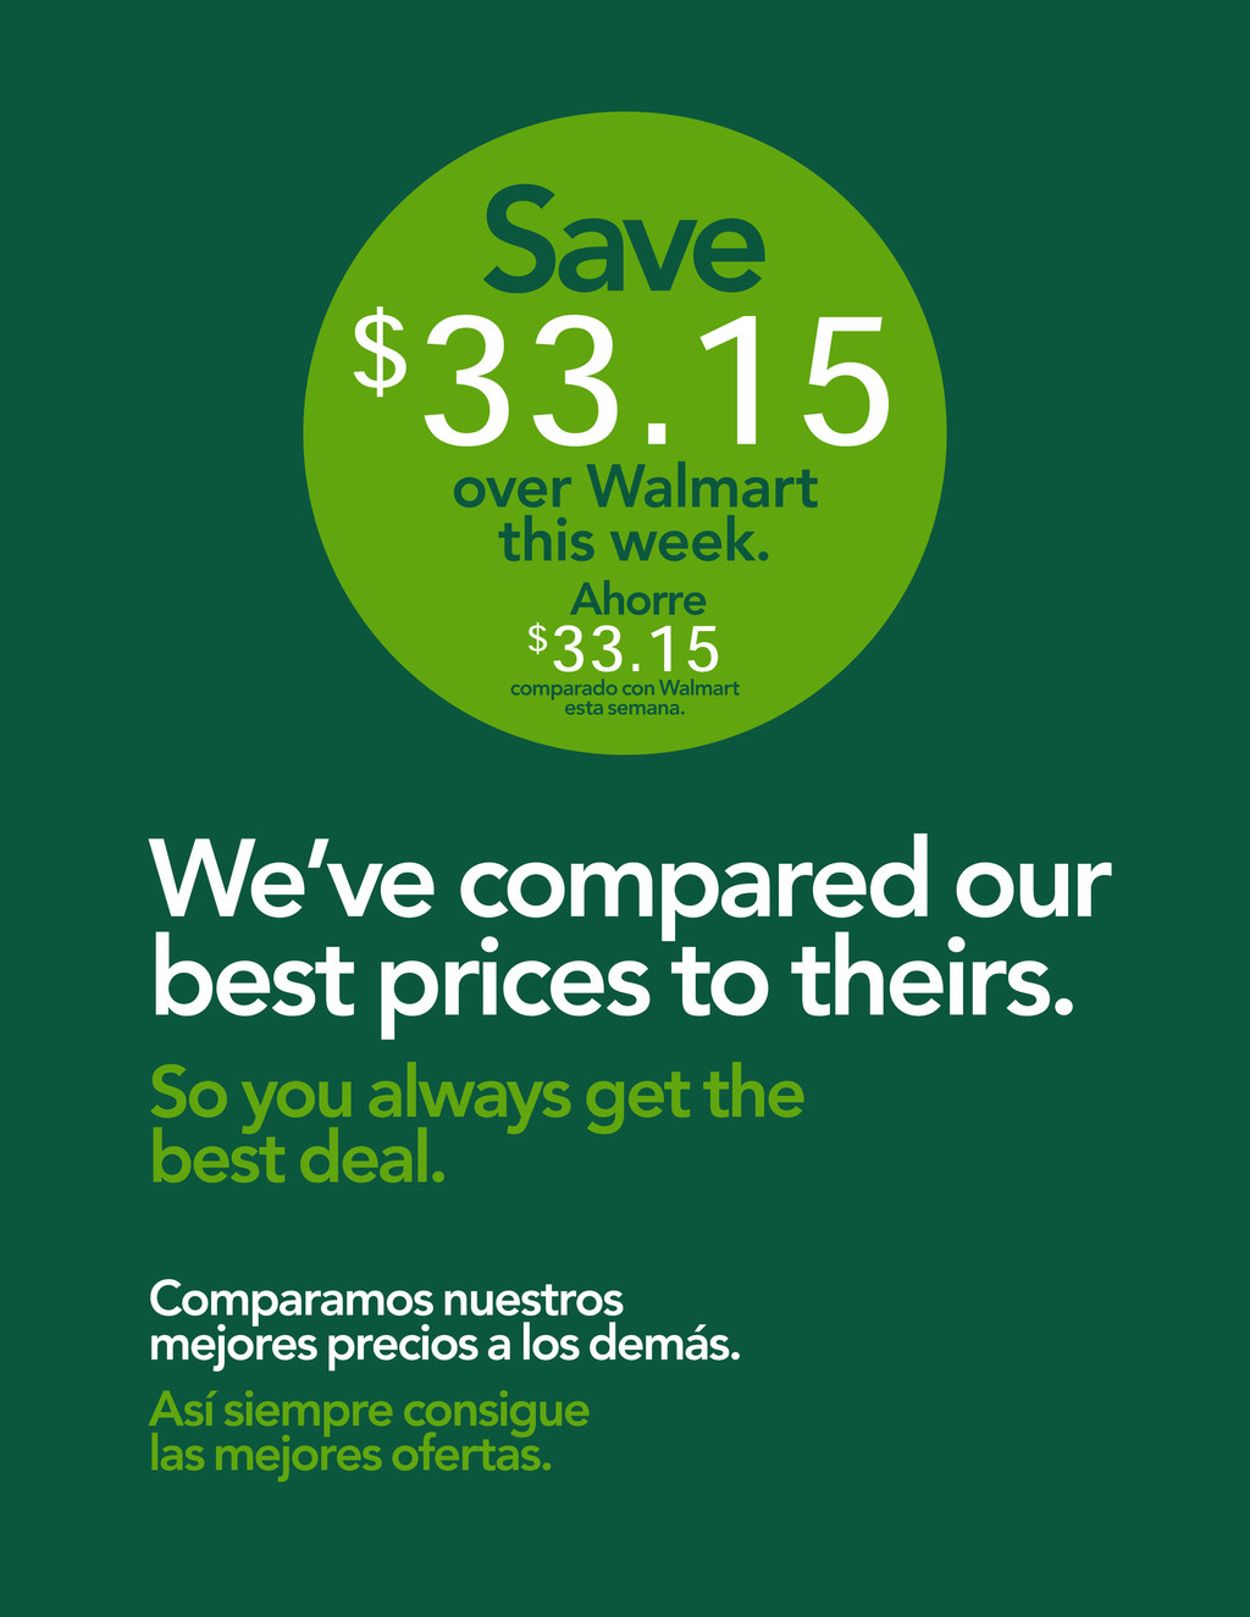 Publix Ad from 10/21/2021